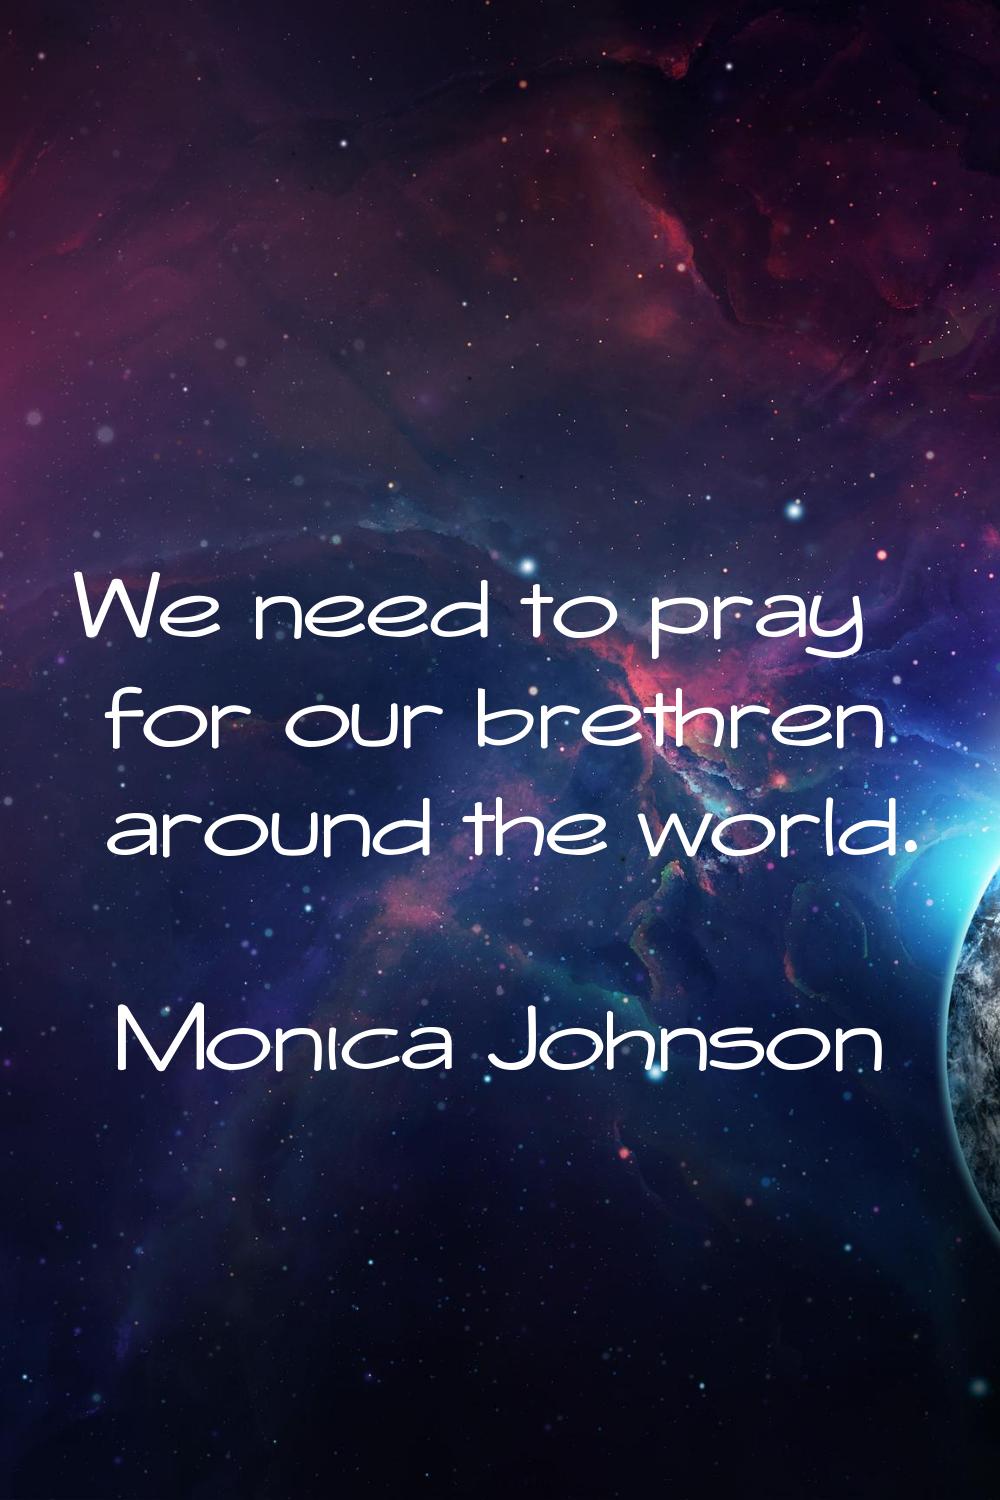 We need to pray for our brethren around the world.